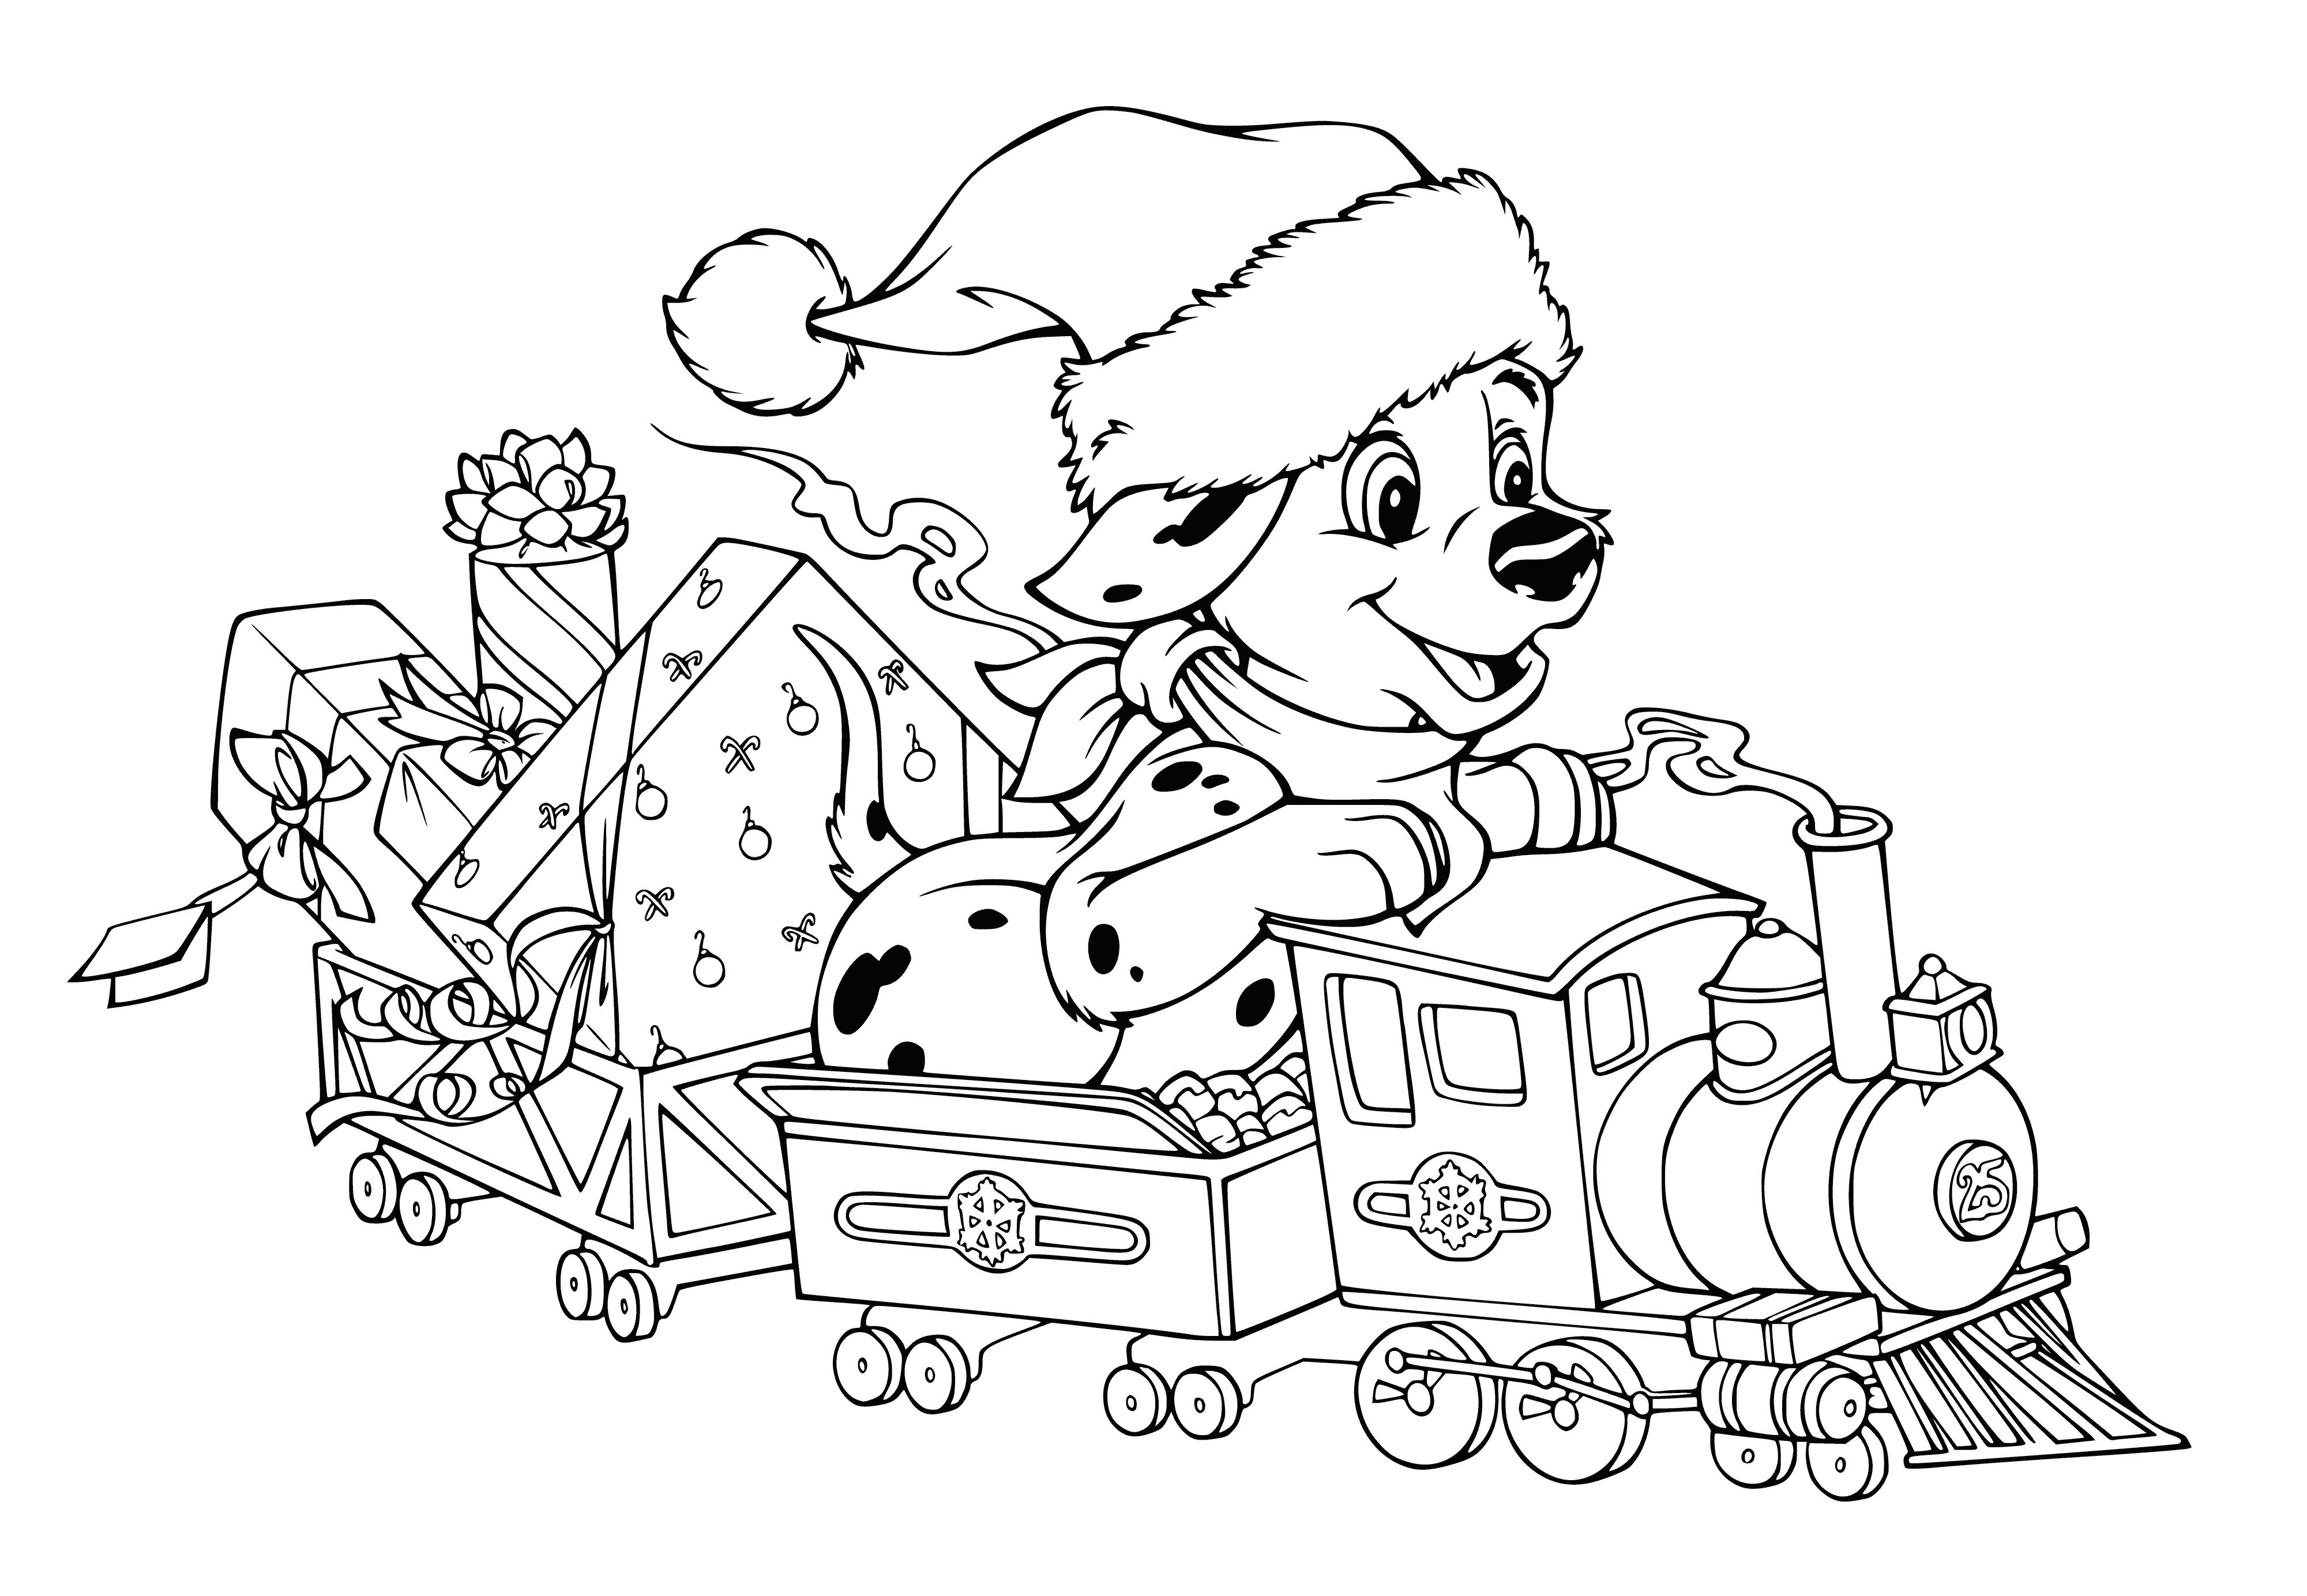 coloring page: Disney characters celebrate New Year on a train w/ gifts, eagerly awaiting the coming year!